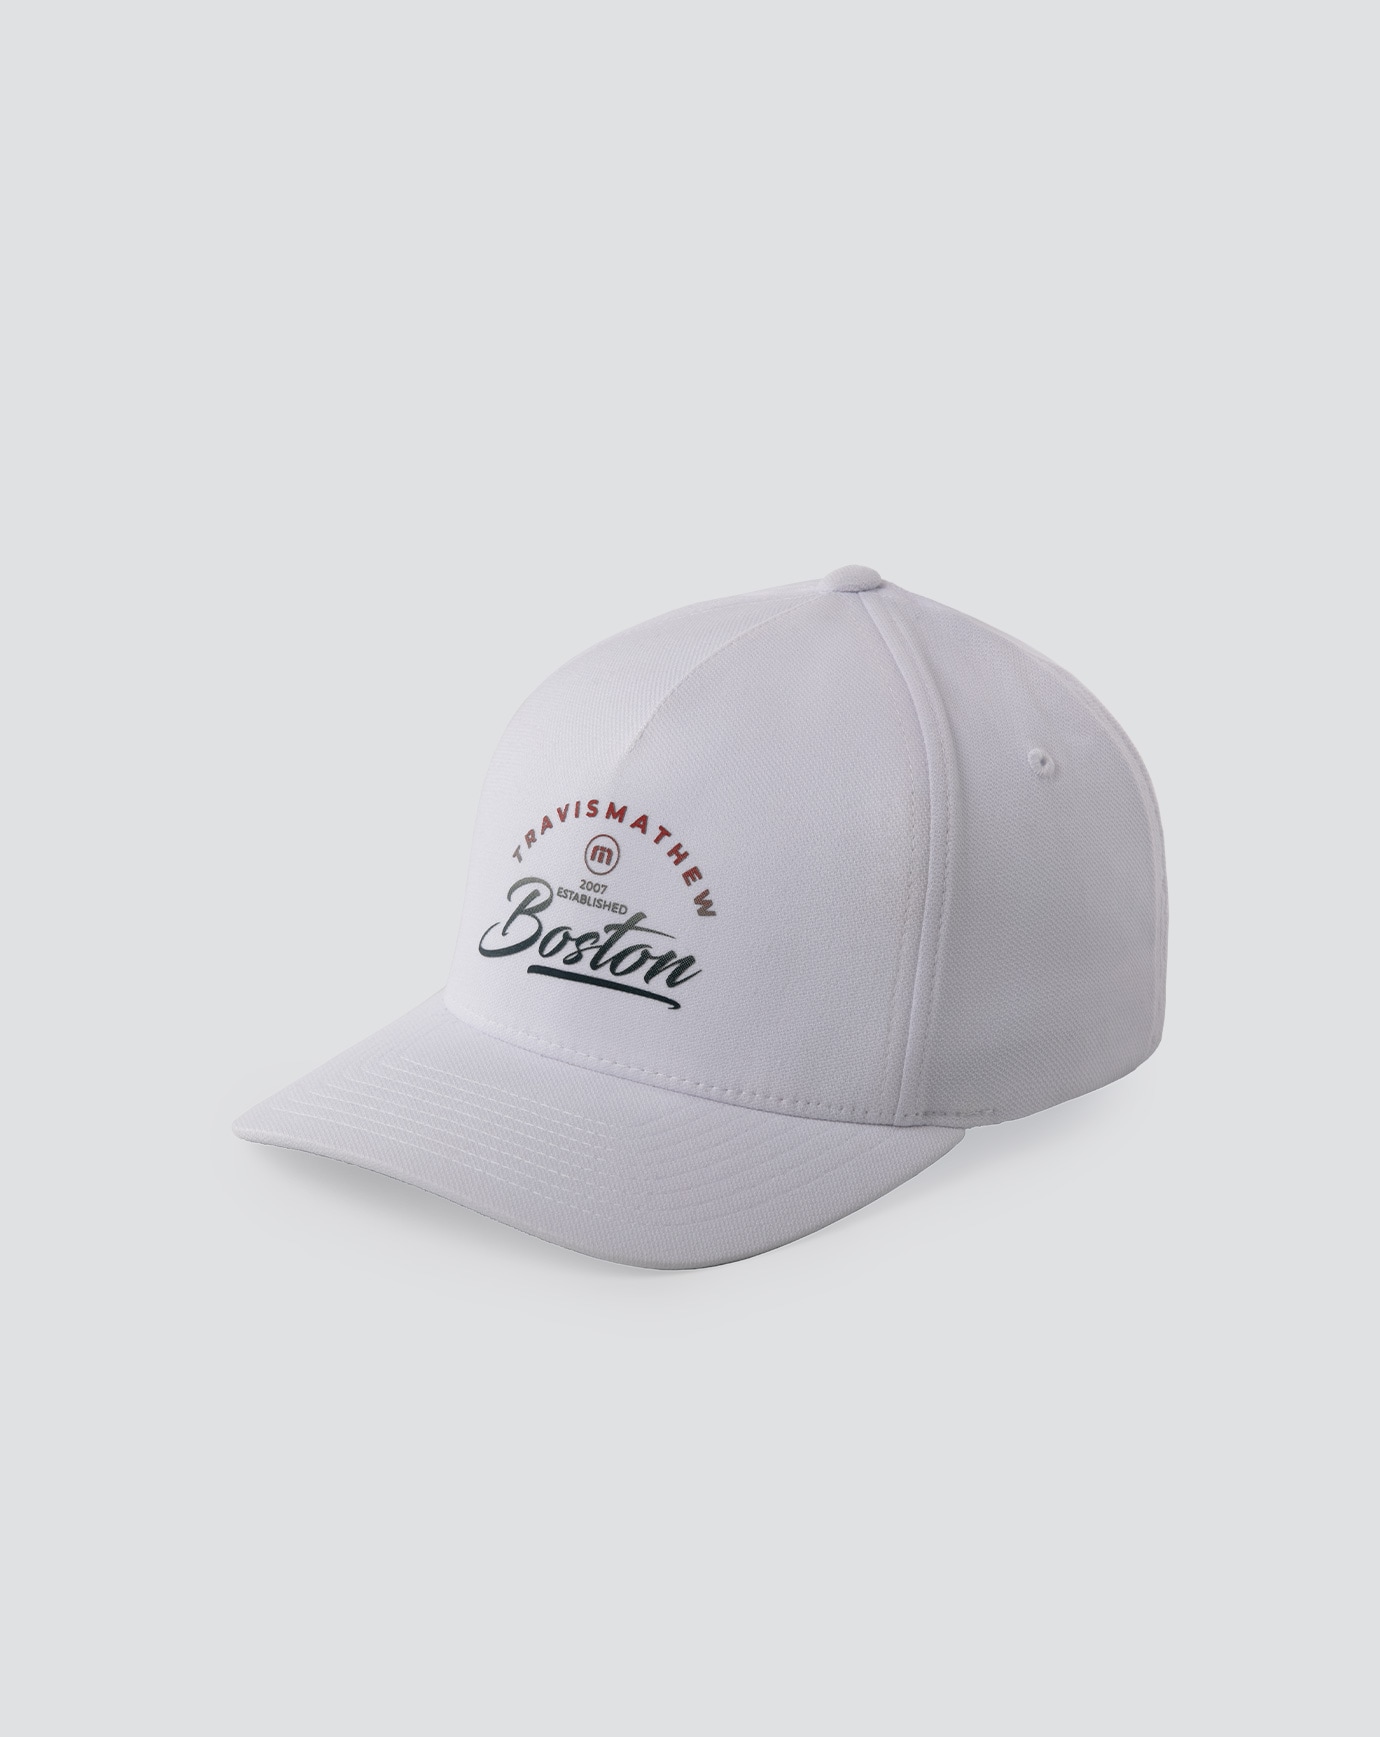 BEACON HILL FITTED HAT Image Thumbnail 2